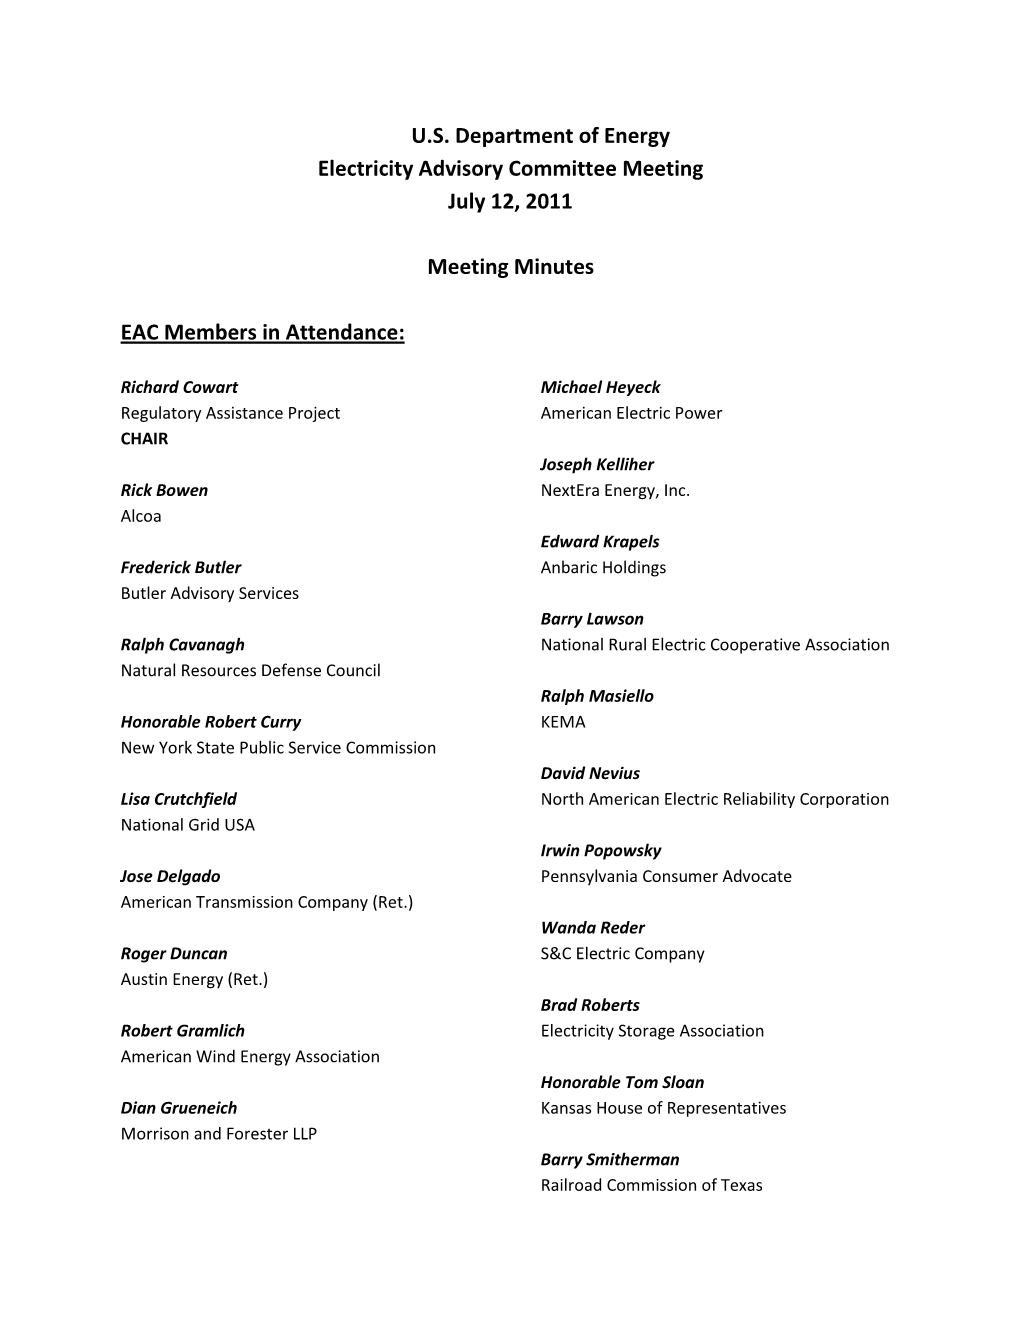 U.S. Department of Energy Electricity Advisory Committee Meeting July 12, 2011